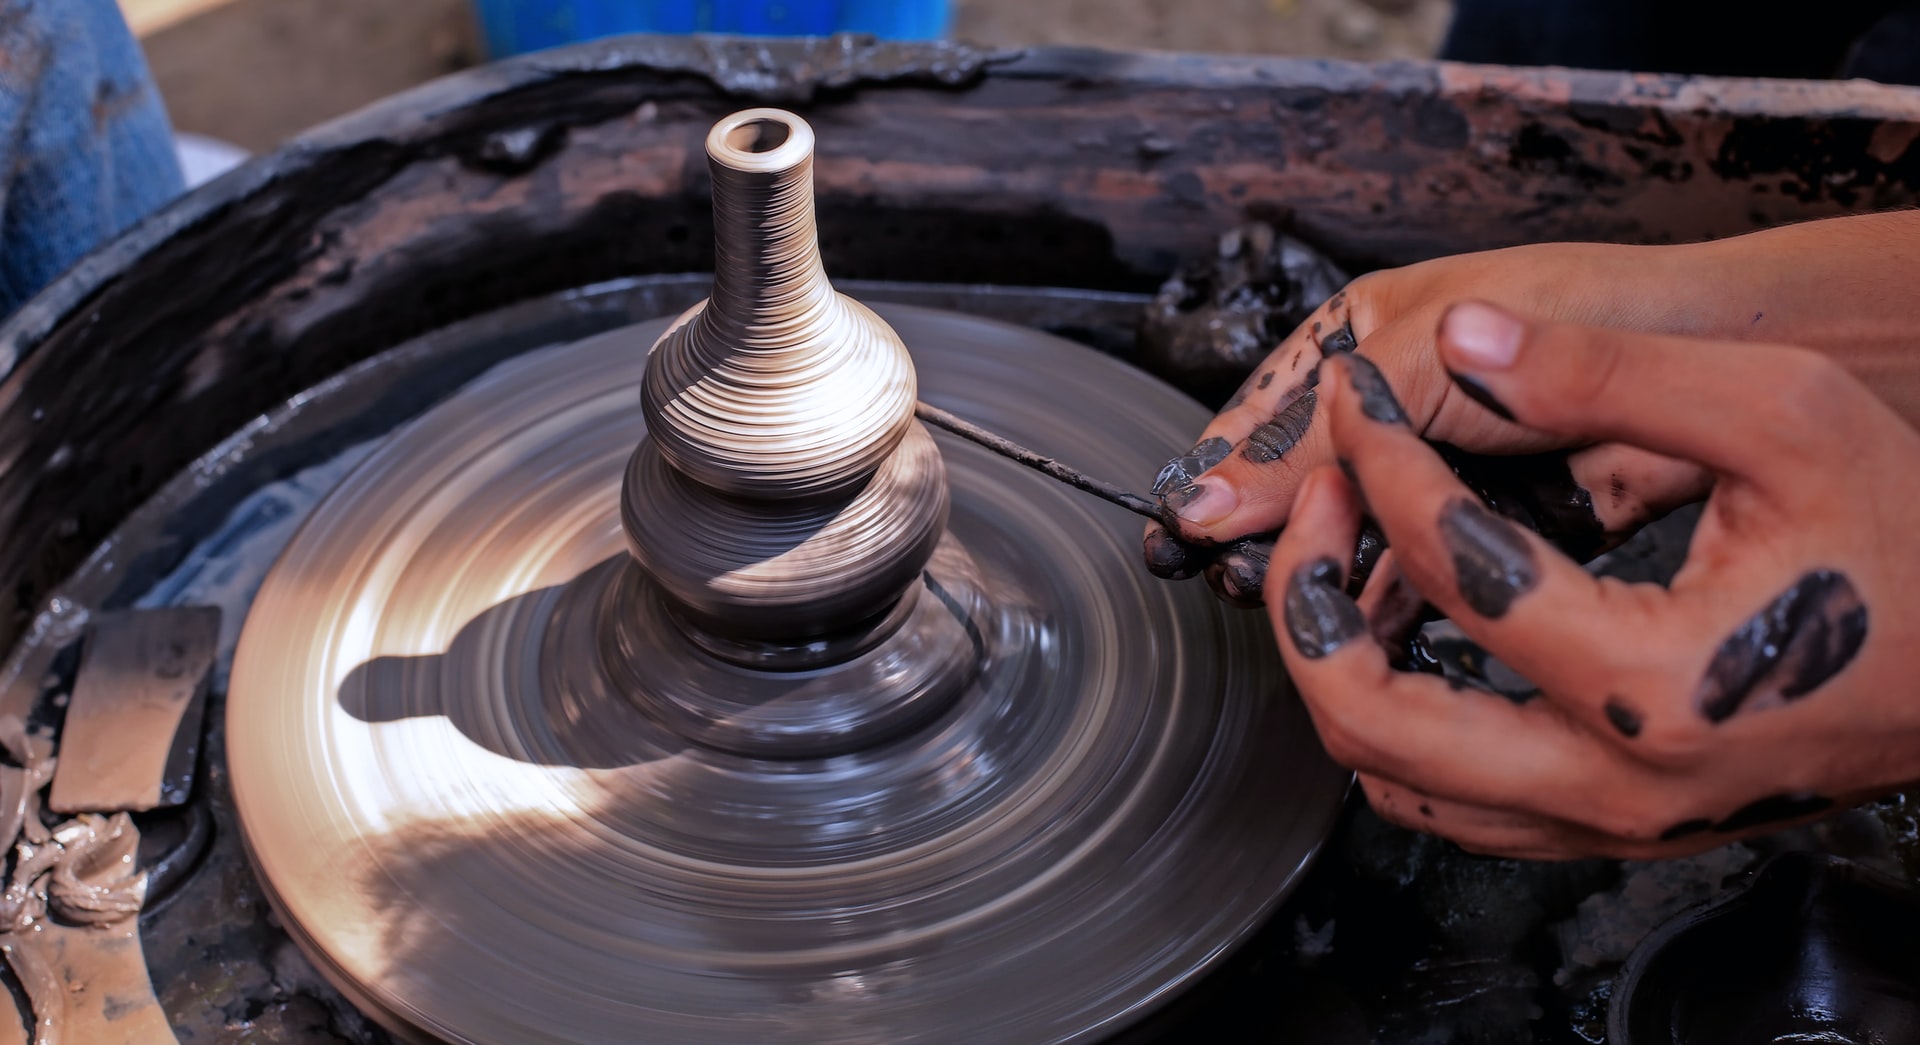 Art work of working on a Pottery wheels